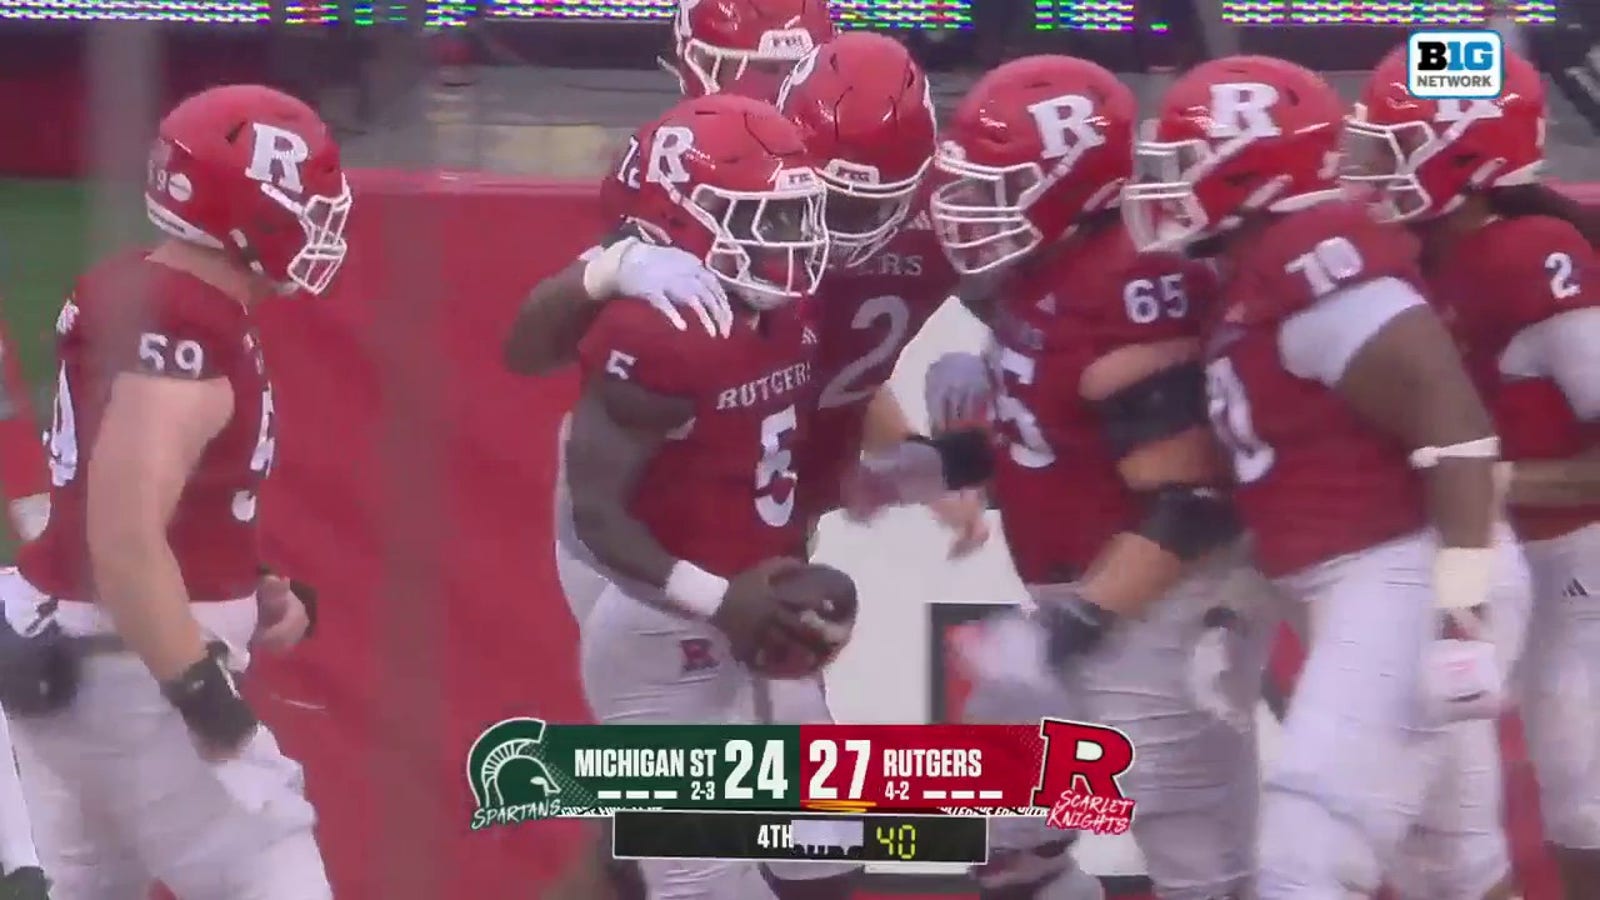 Rutgers dashes to late lead vs. Michigan State